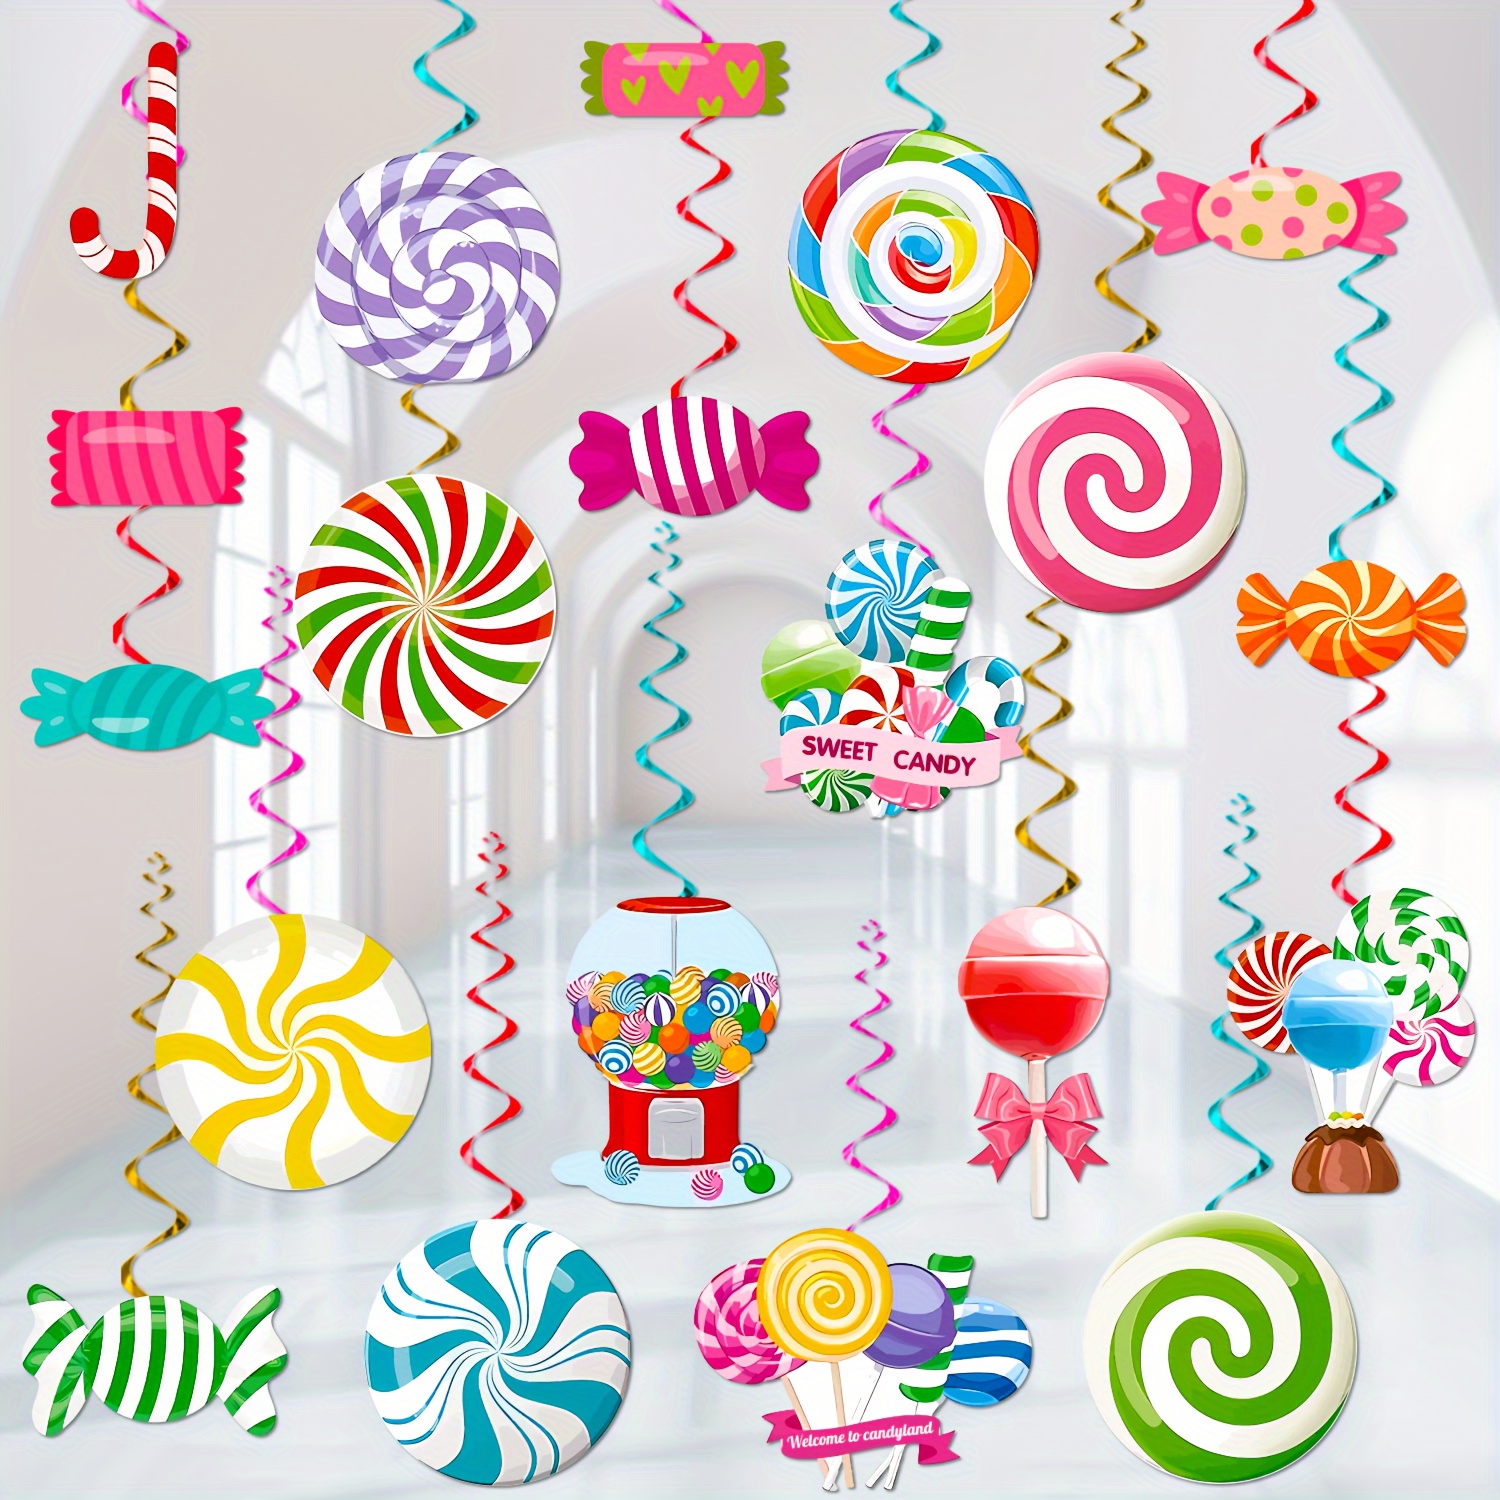 

Candy Themed Hanging Swirl Decorations, 40pcs Colorful Lollipop Birthday Party Supplies, Versatile Paper Decor For Candy Store Gifts & Home Celebrations - No Power Needed